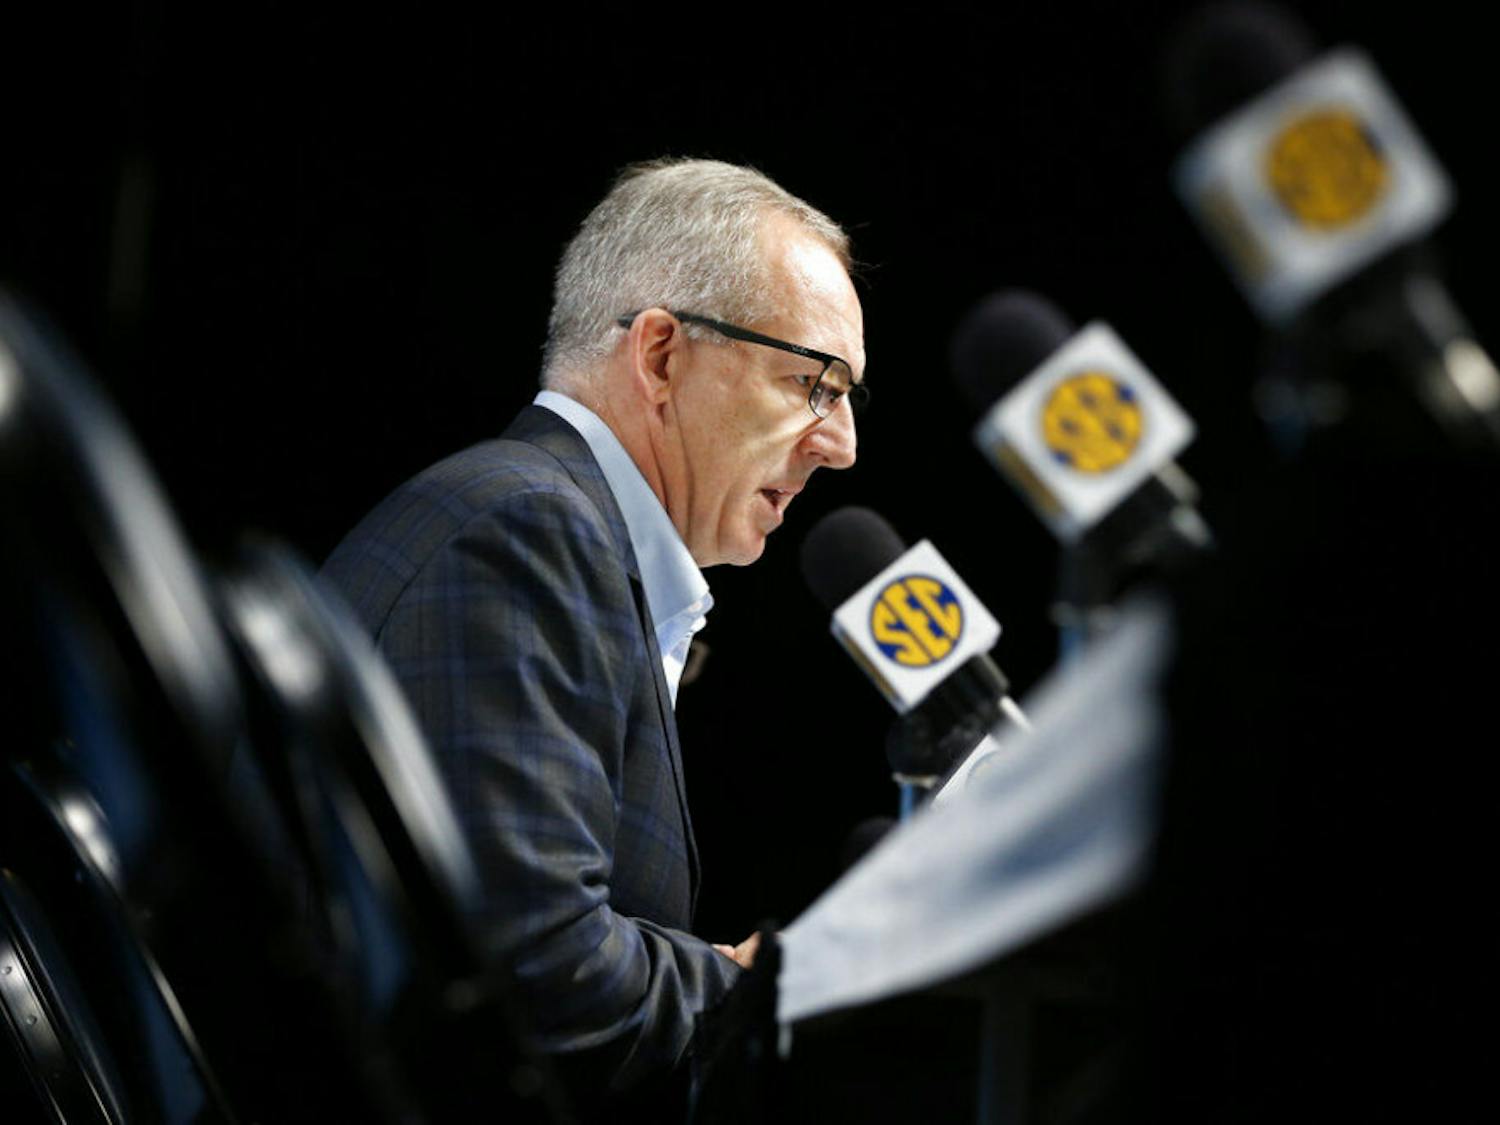 Greg Sankey, commissioner of the Southeastern Conference, talks about the decision to cancel the remaining games in the SEC NCAA college basketball tournament Thursday, March 12, 2020, in Nashville, Tenn. The conference tournament was cancelled Thursday due to coronavirus concerns. (AP Photo/Mark Humphrey)